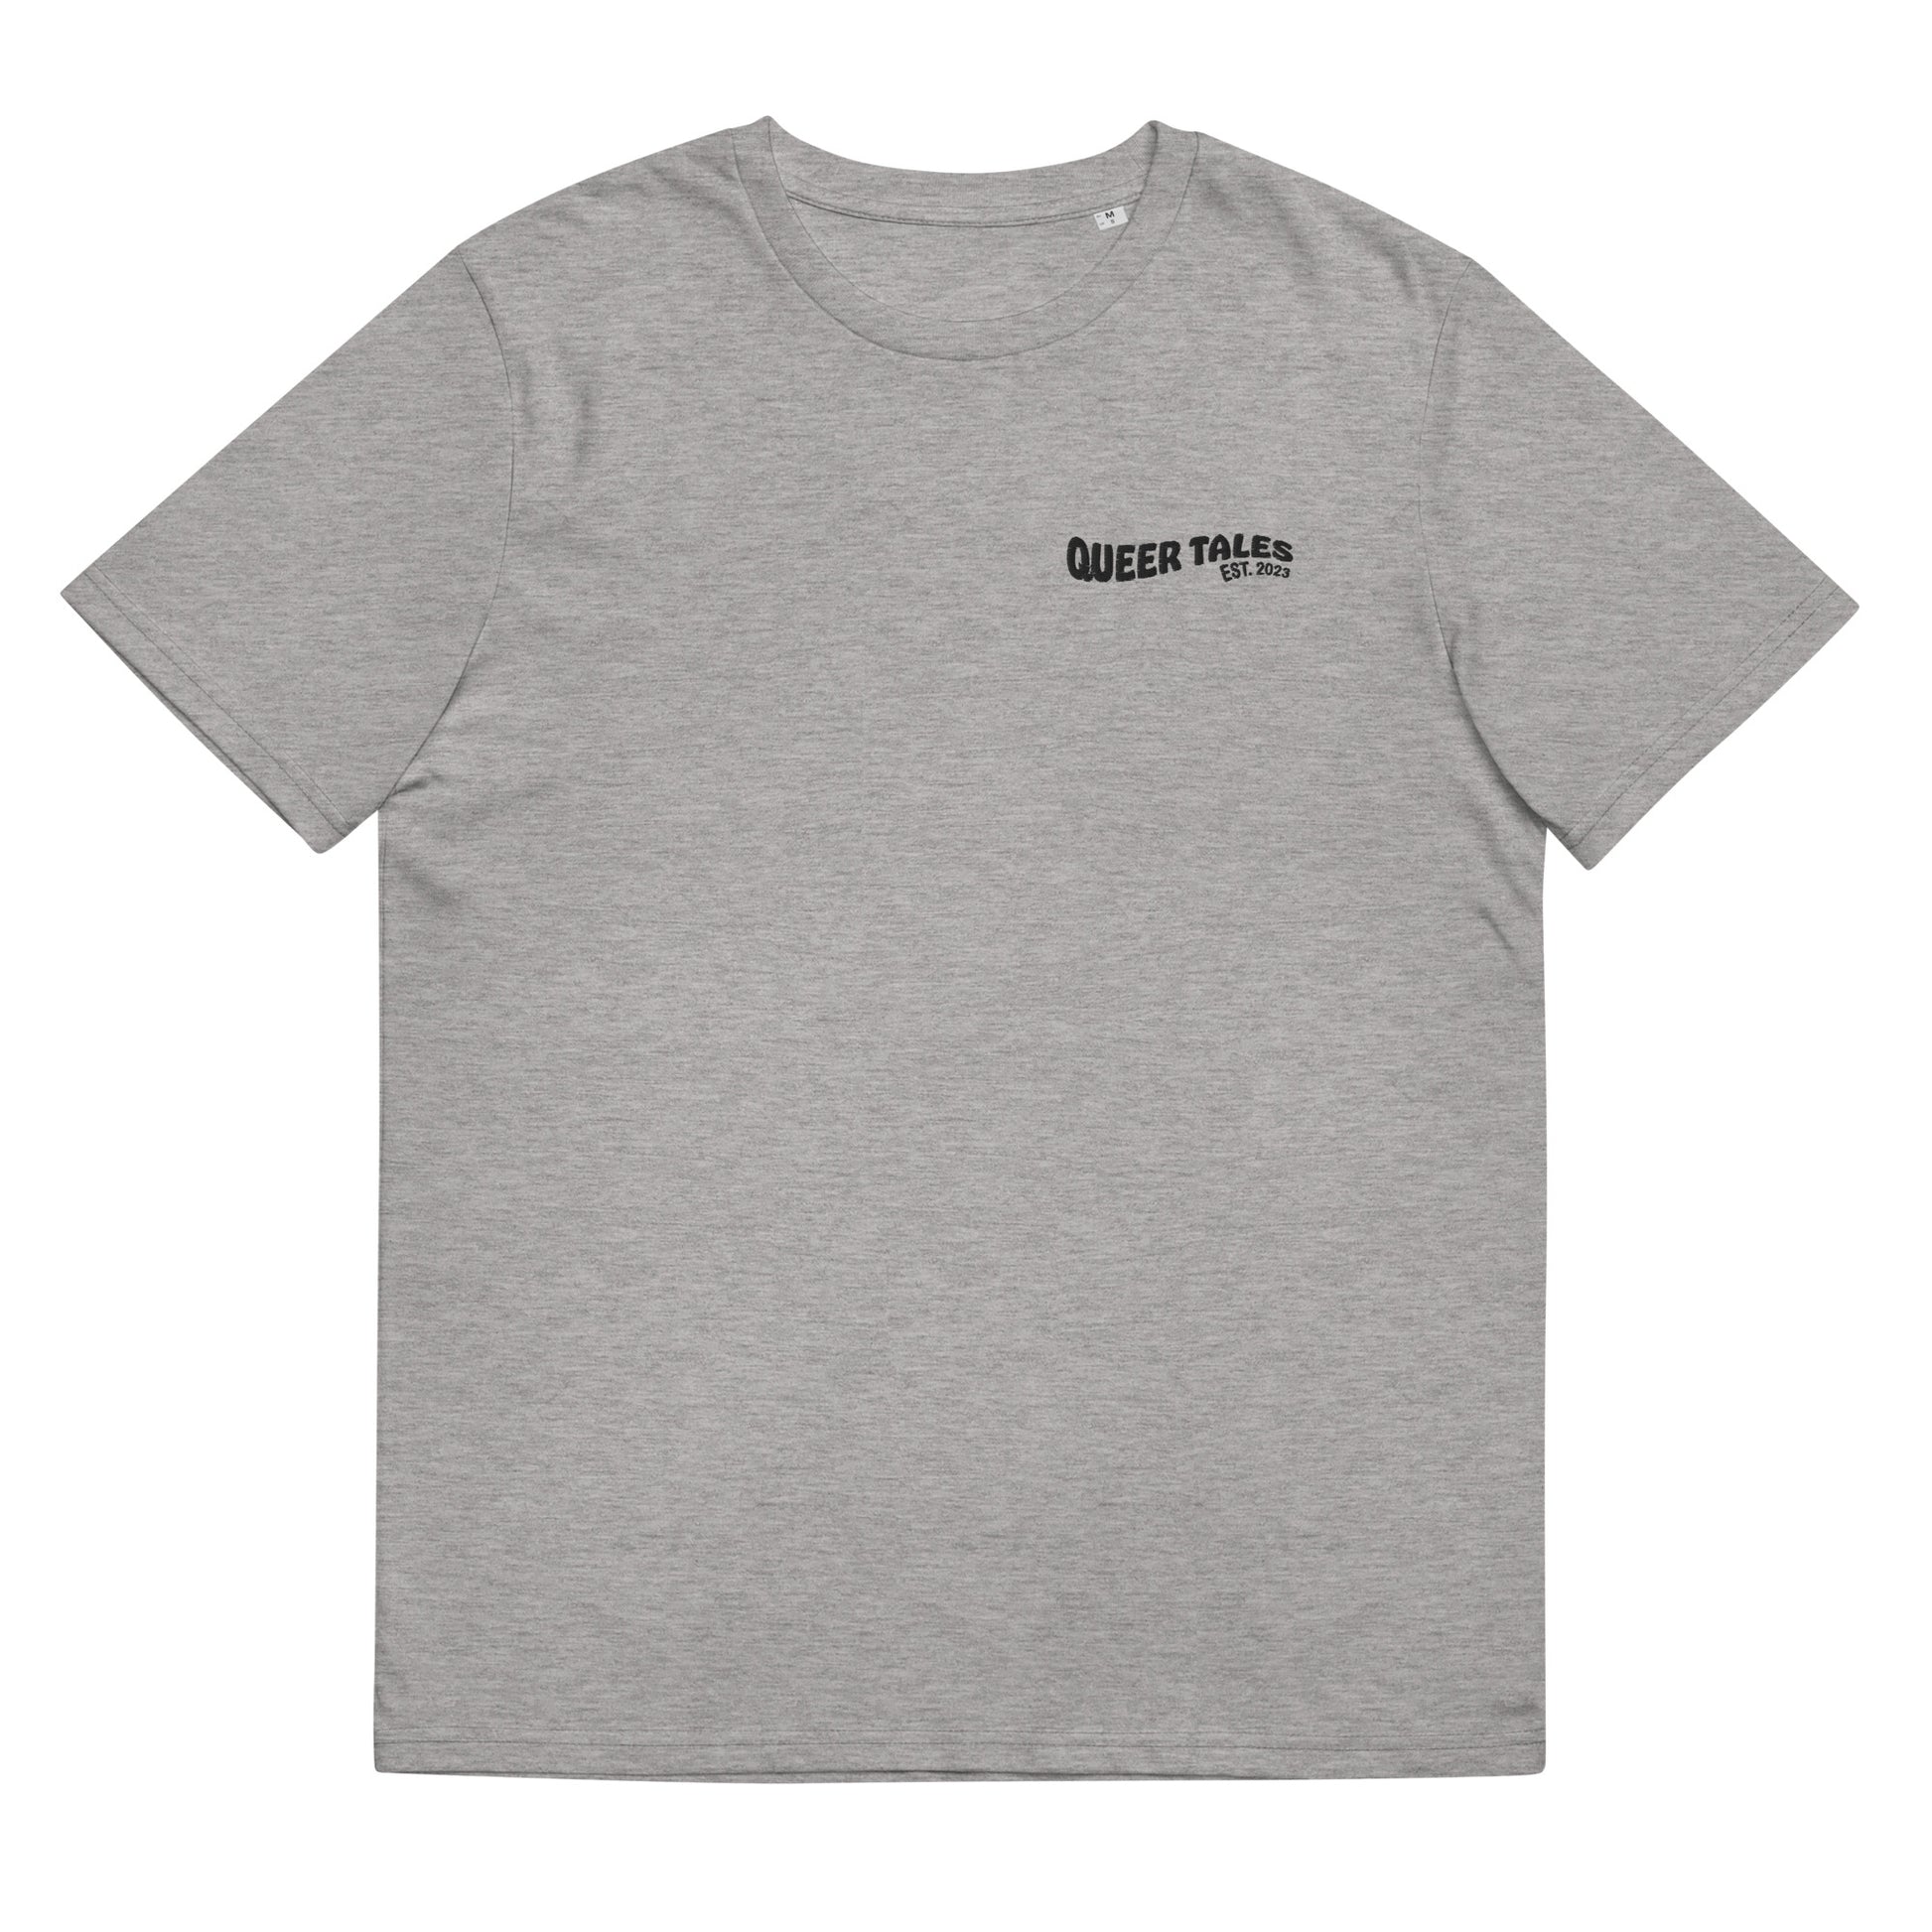 Fitted heather grey organic cotton t-shirt with embroidered queer tales on the left chest. Available in sizes S to 2XL.